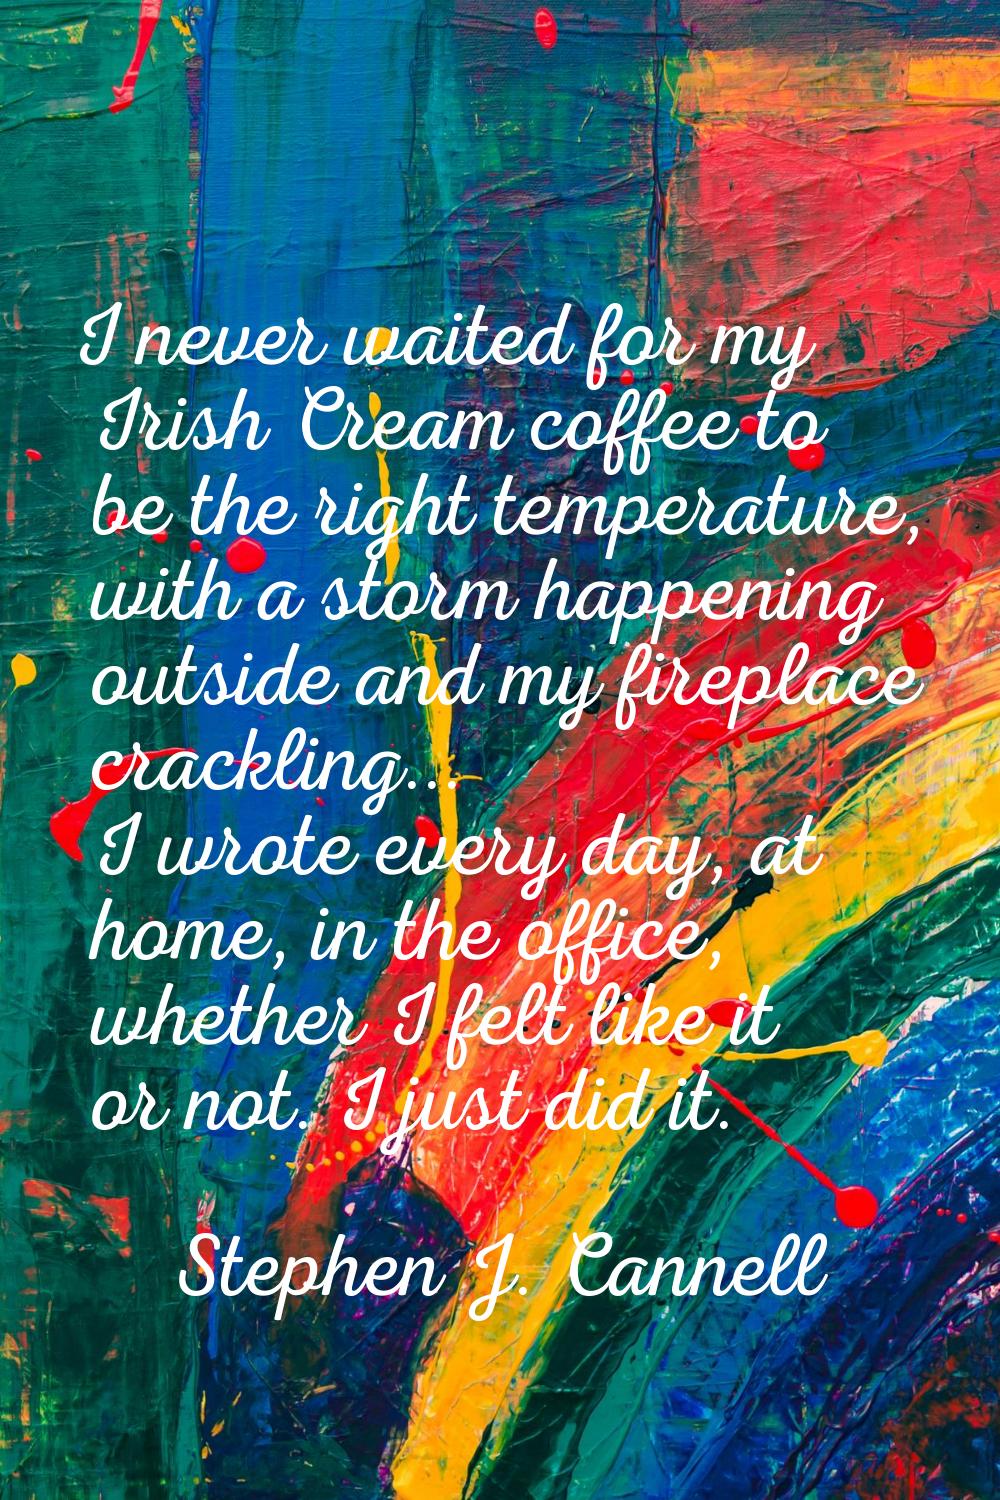 I never waited for my Irish Cream coffee to be the right temperature, with a storm happening outsid